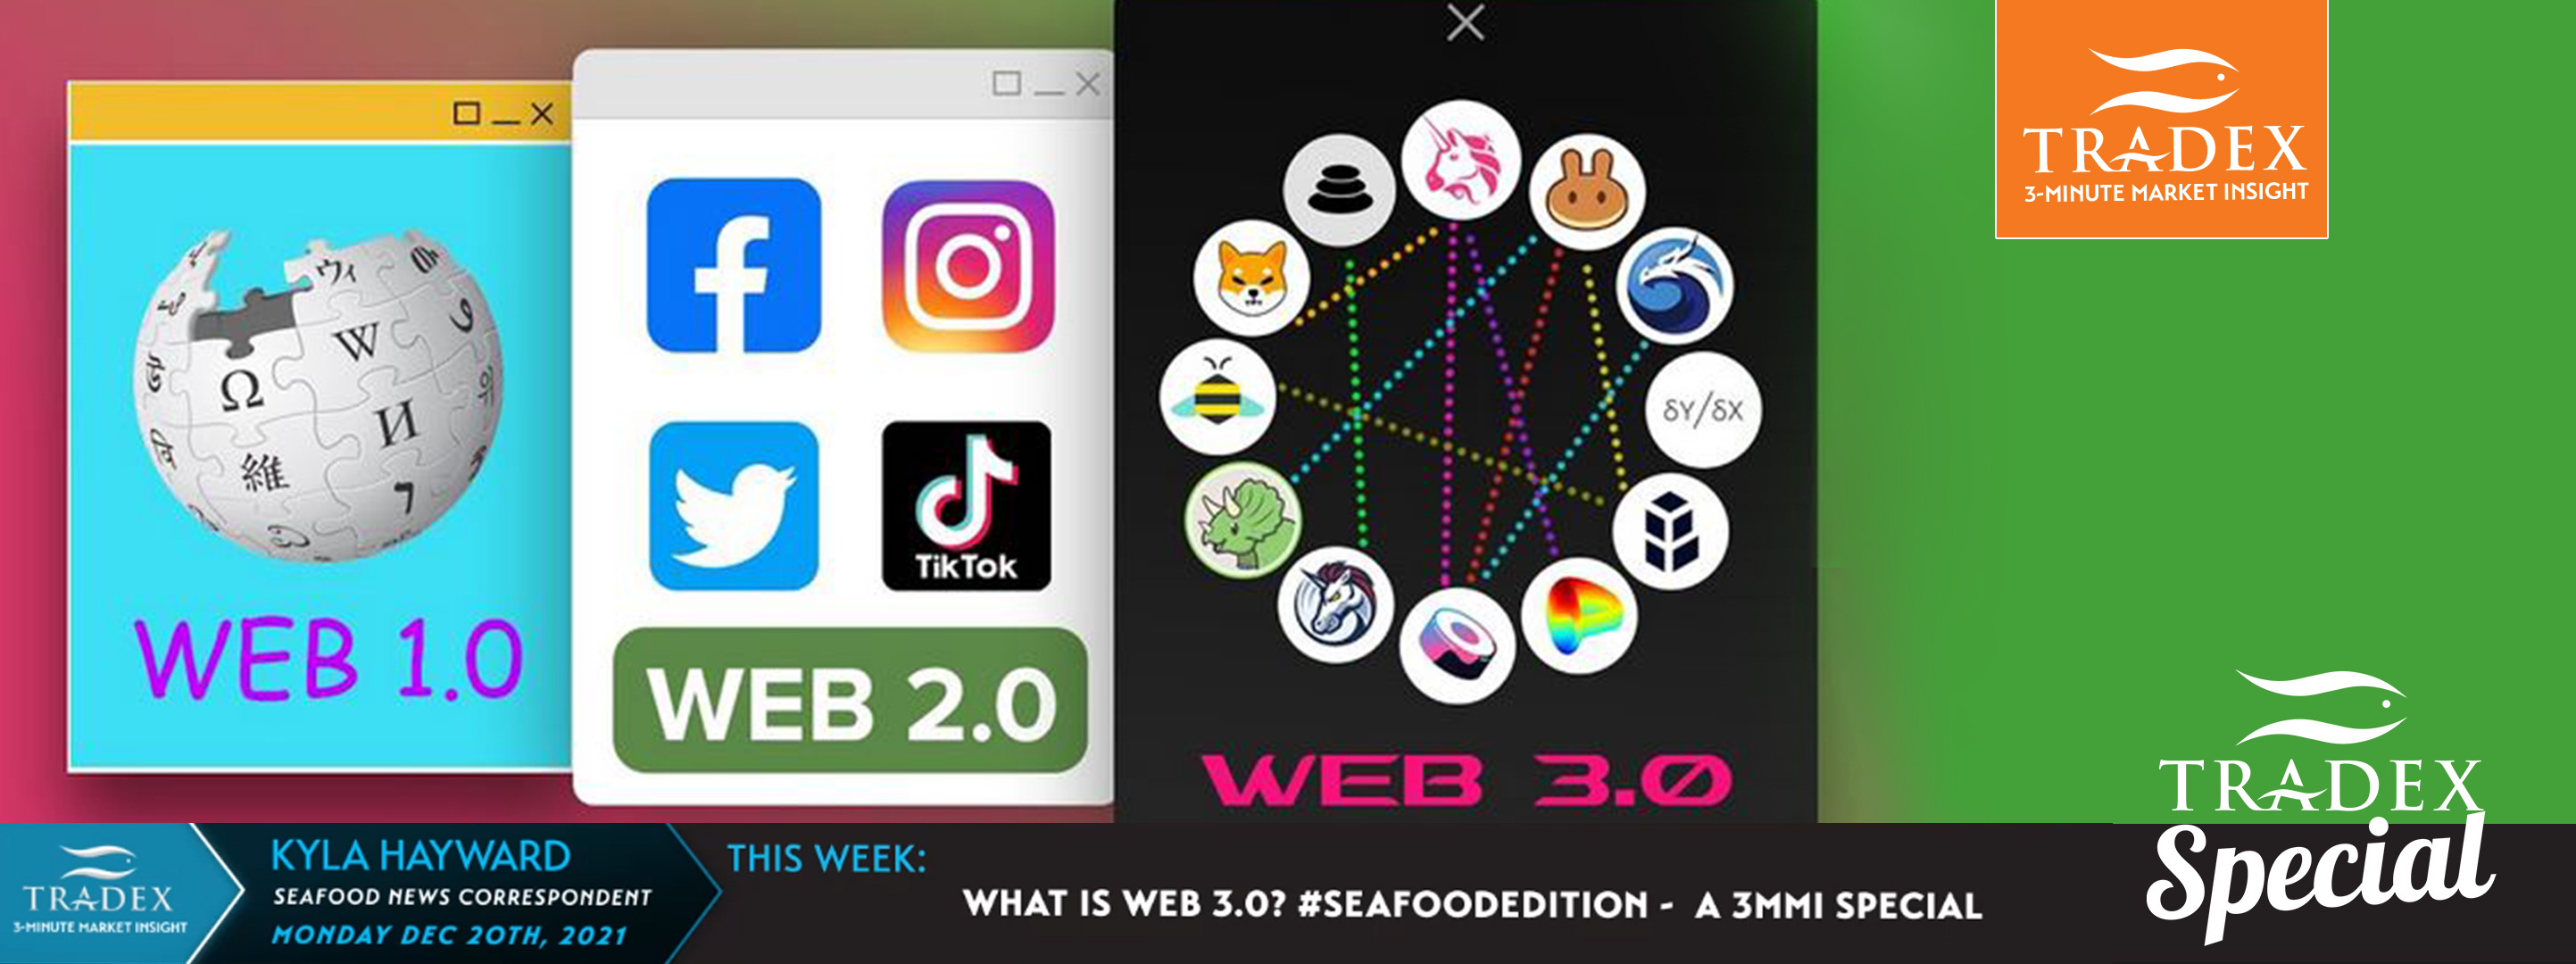 Web 1.0, 2.0 and 3.0